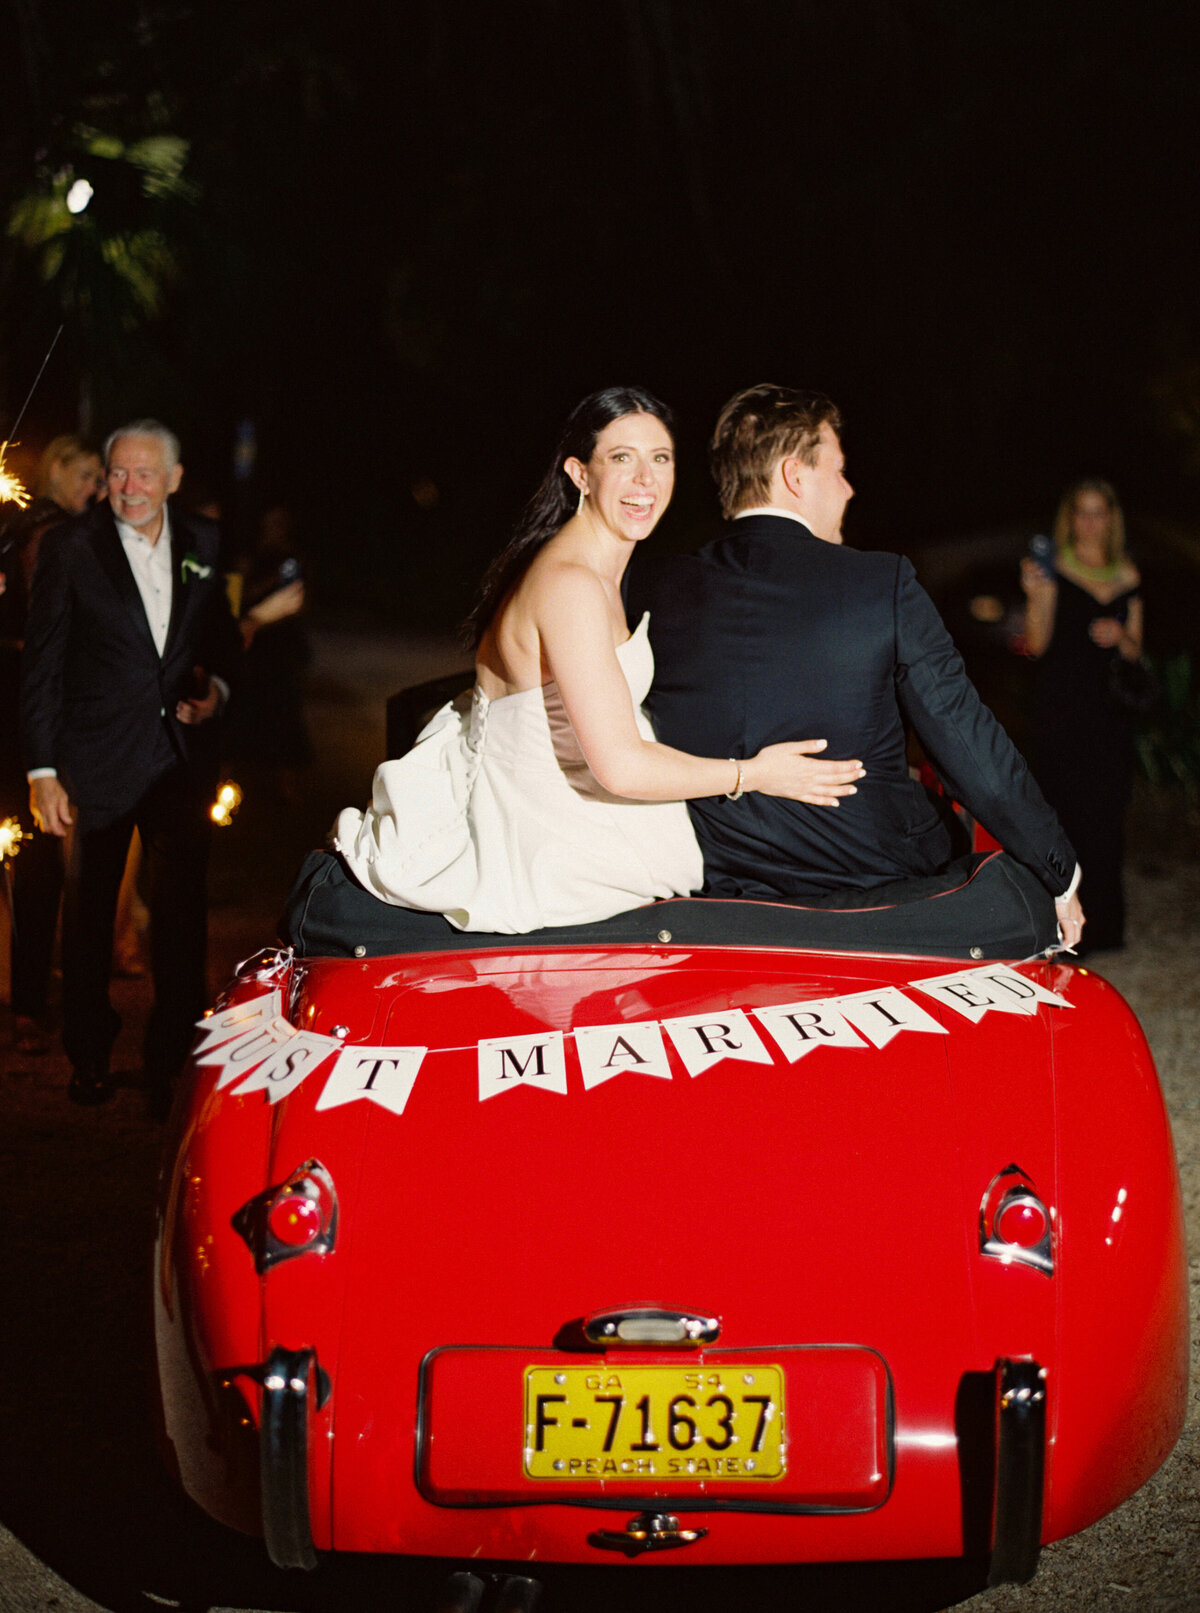 chic-bride-and-groom-drive-away-from wedding-vintage-car-1394